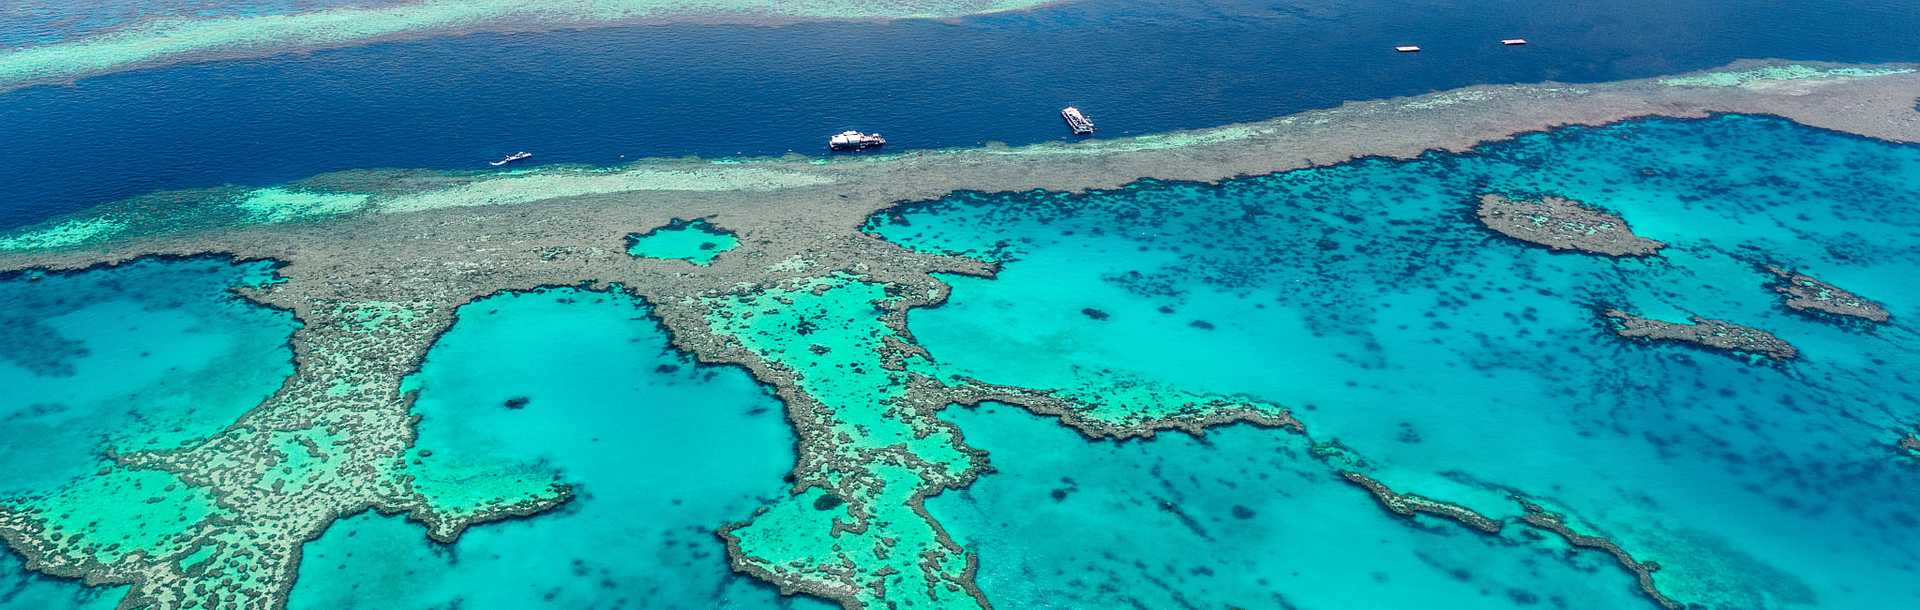  Australia's Great Barrier seen from a helicopter